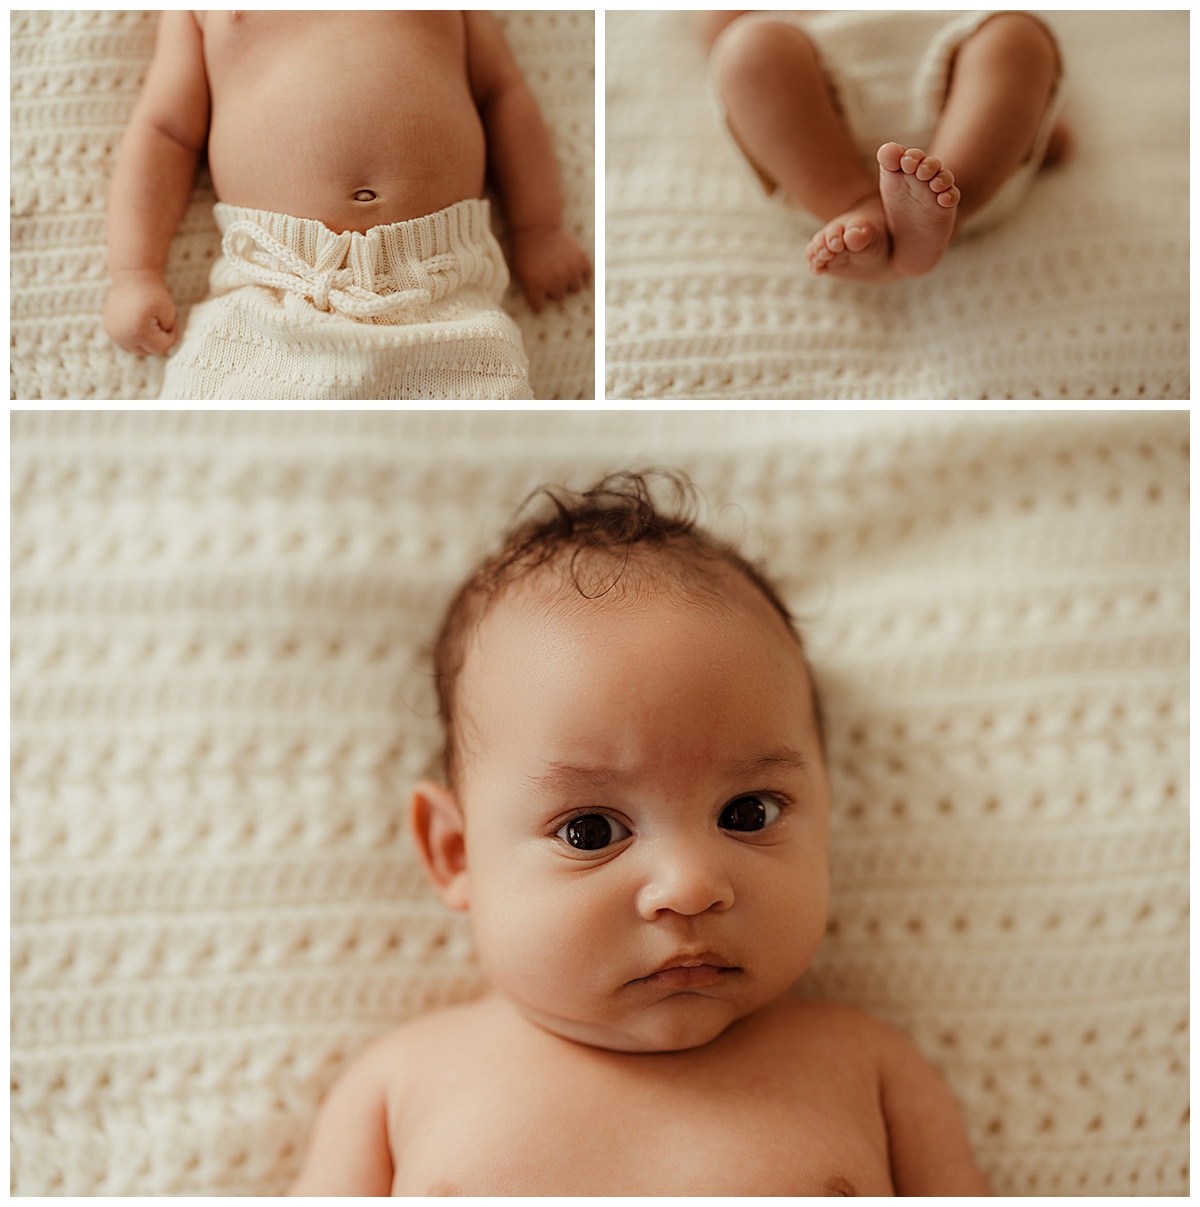 Baby lays on the blanket for Lifestyle Newborn Session